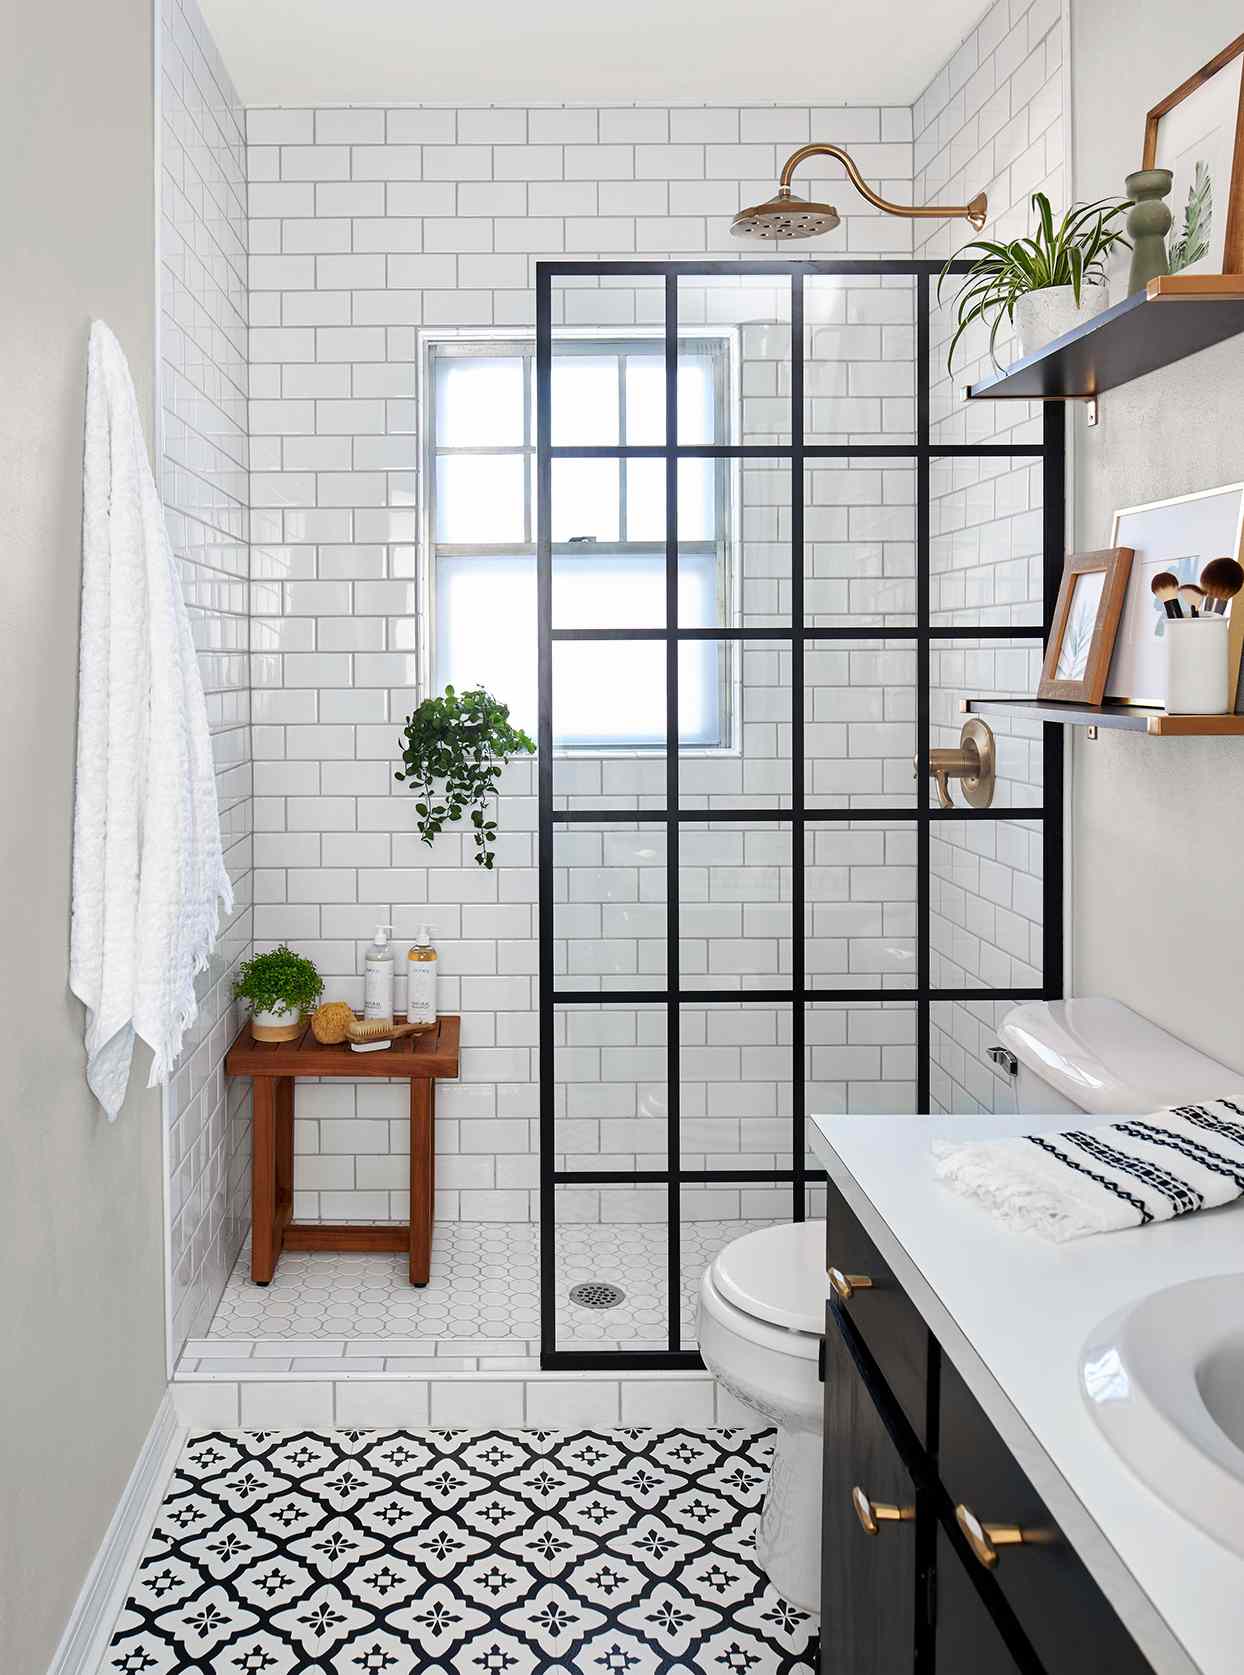 Small Bathroom Remodels, How Much Does It Cost To Remodel A Small Full Bathroom